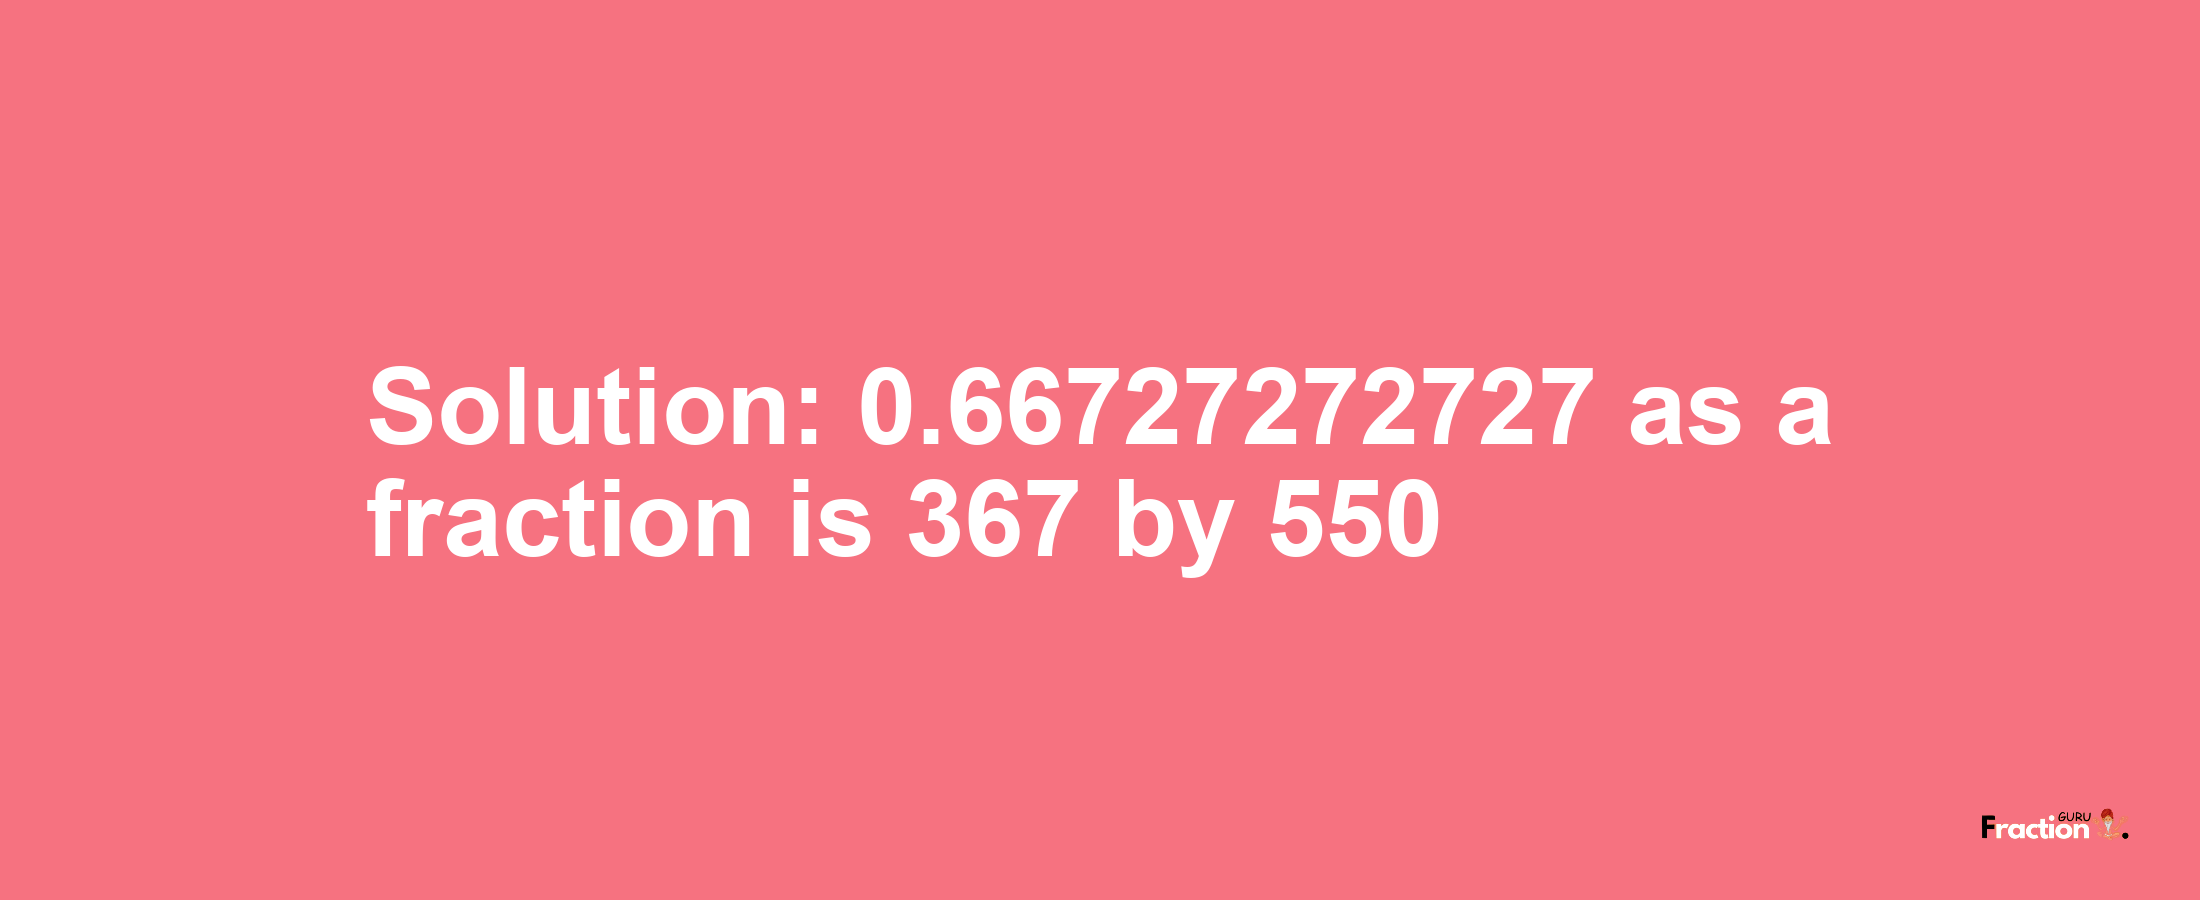 Solution:0.66727272727 as a fraction is 367/550